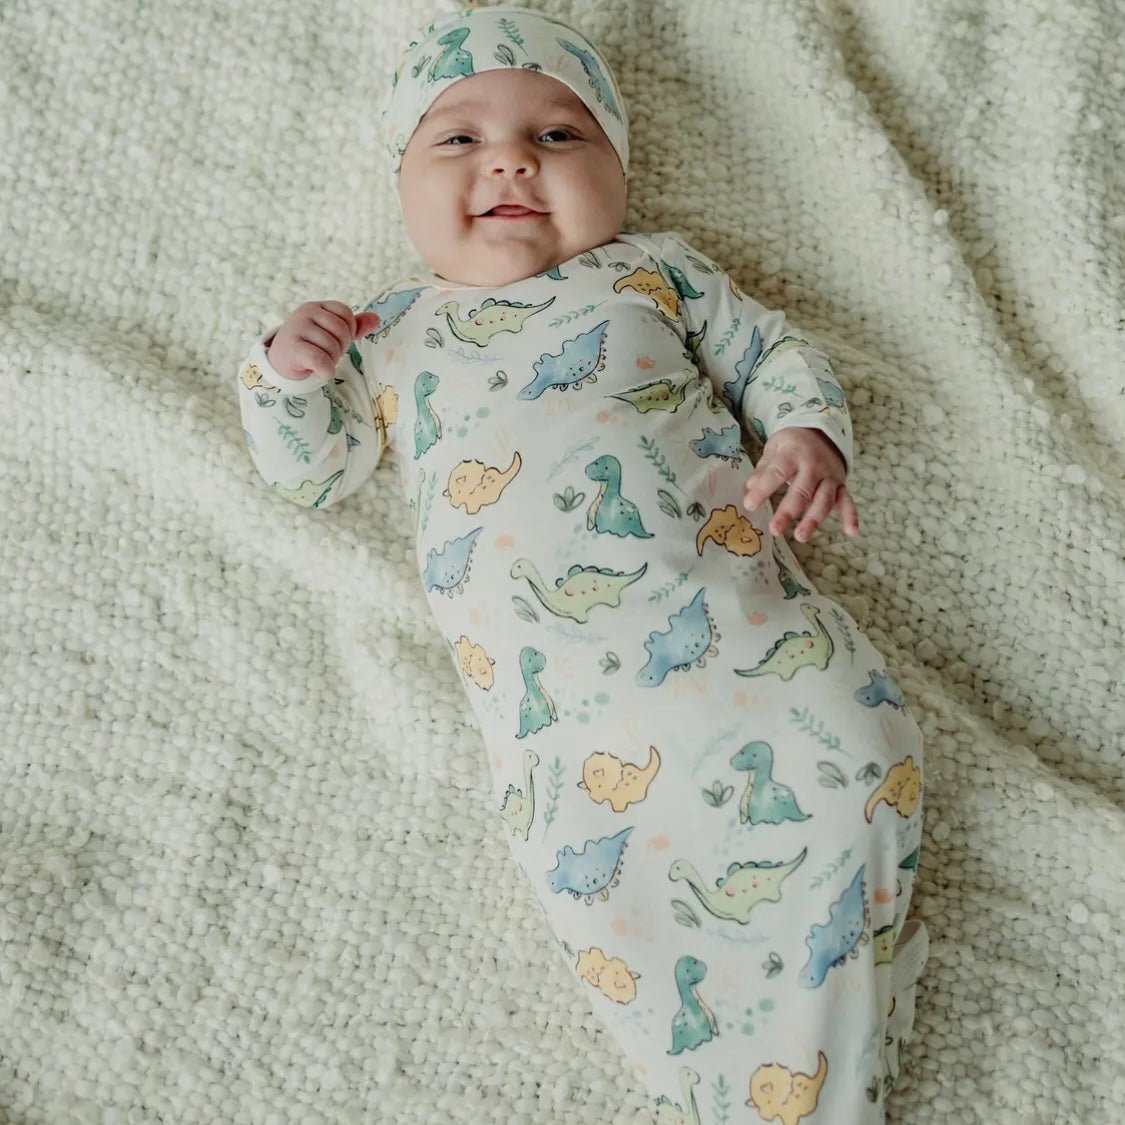 Baby in under the Nile dinosaur Organic gown and beanie